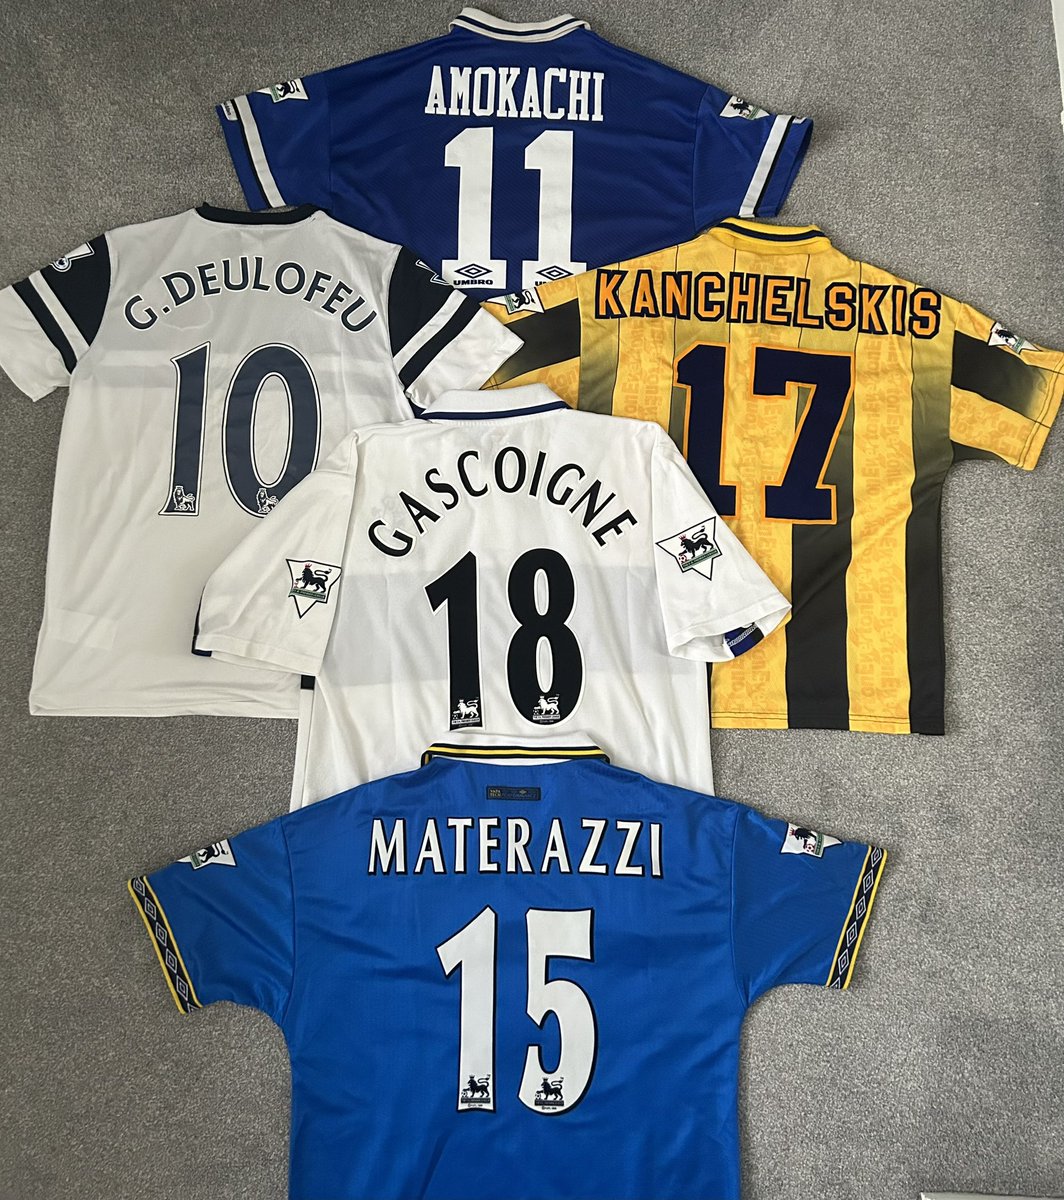 More artistry from @Ftprint3 re-energising these @everton @AmokachiTheBull @gerardeulofeu @PaulGazza_8 @AAKanchelskis & @iomatrix23 with name & number sets, highly recommended @bluetoffee9 @efcshirts #Everton Ready for a 5 side now 💙